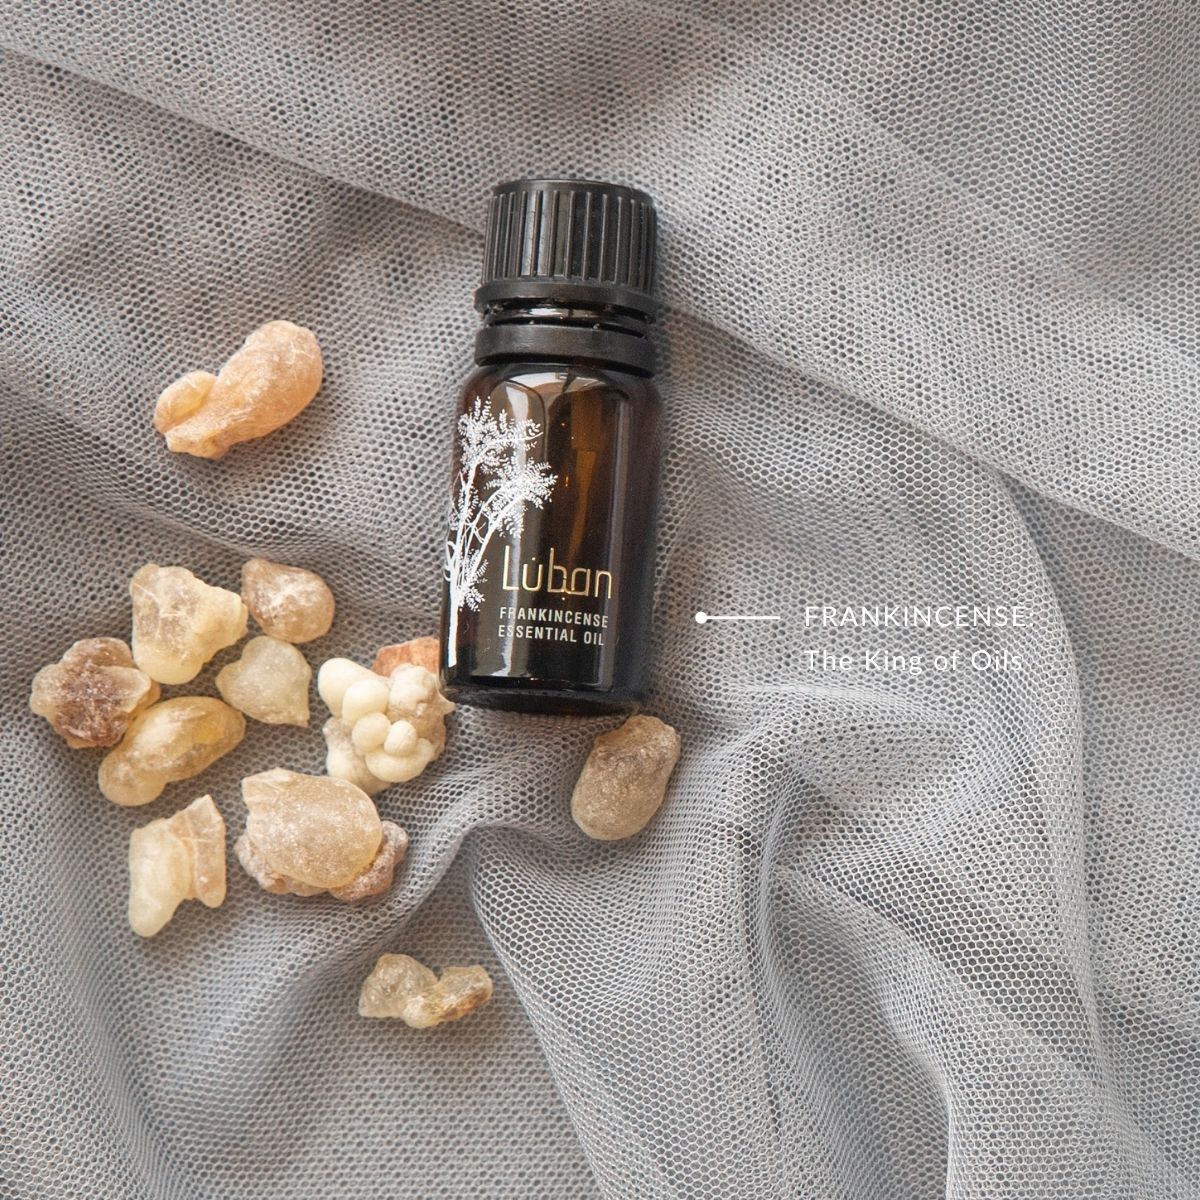 Frankincense is the king of oils